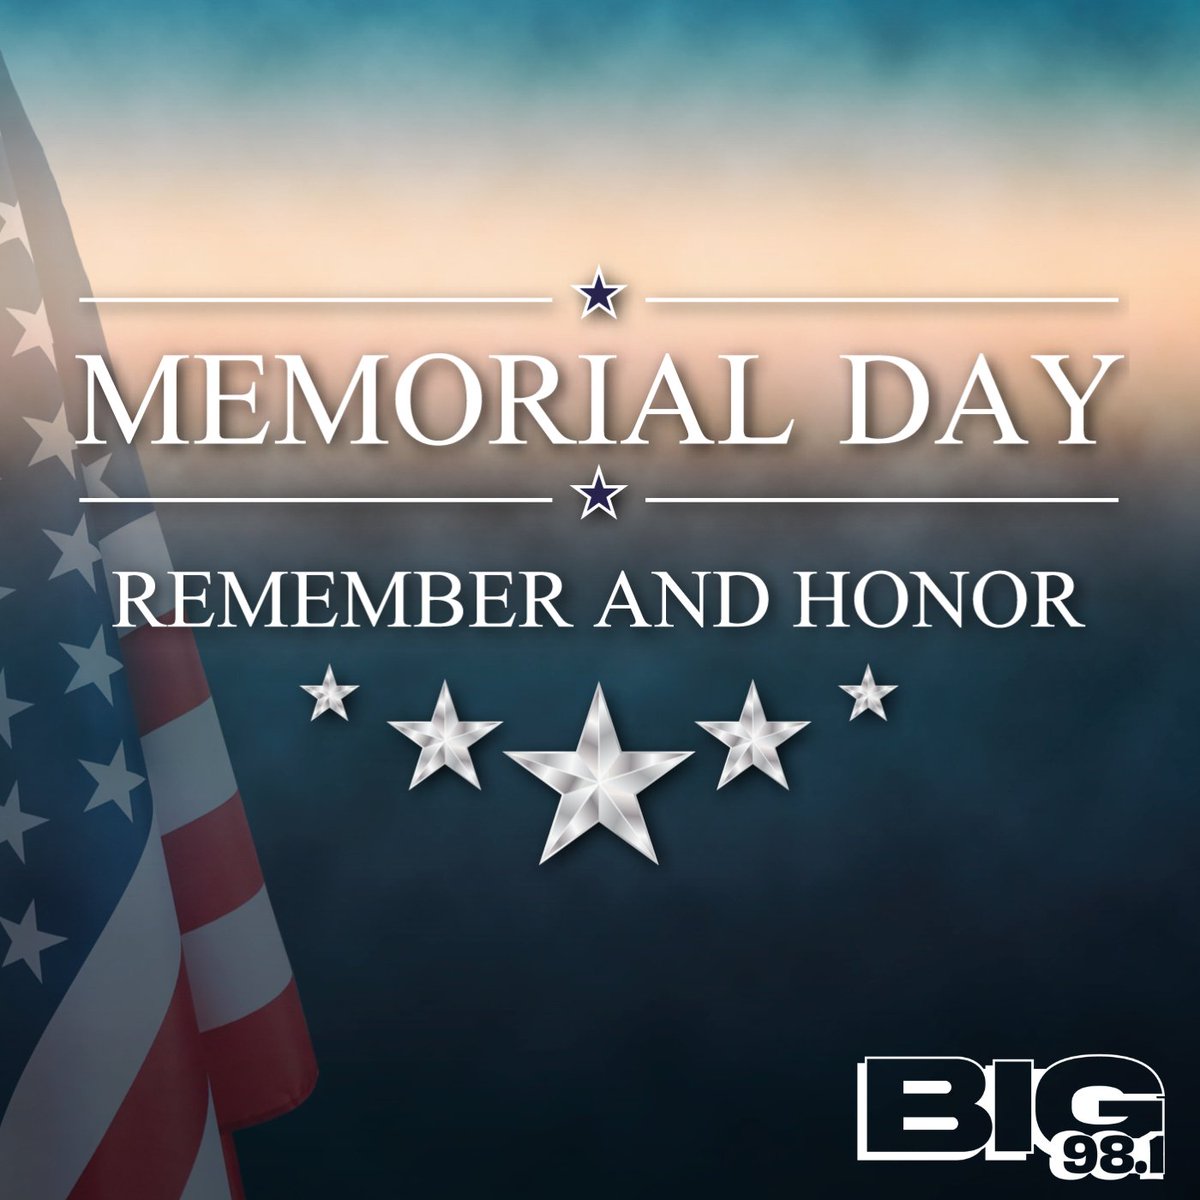 Today we remember and honor our brave heroes who gave their all. Happy #MemorialDay from all of us at #BIG981 🇺🇸